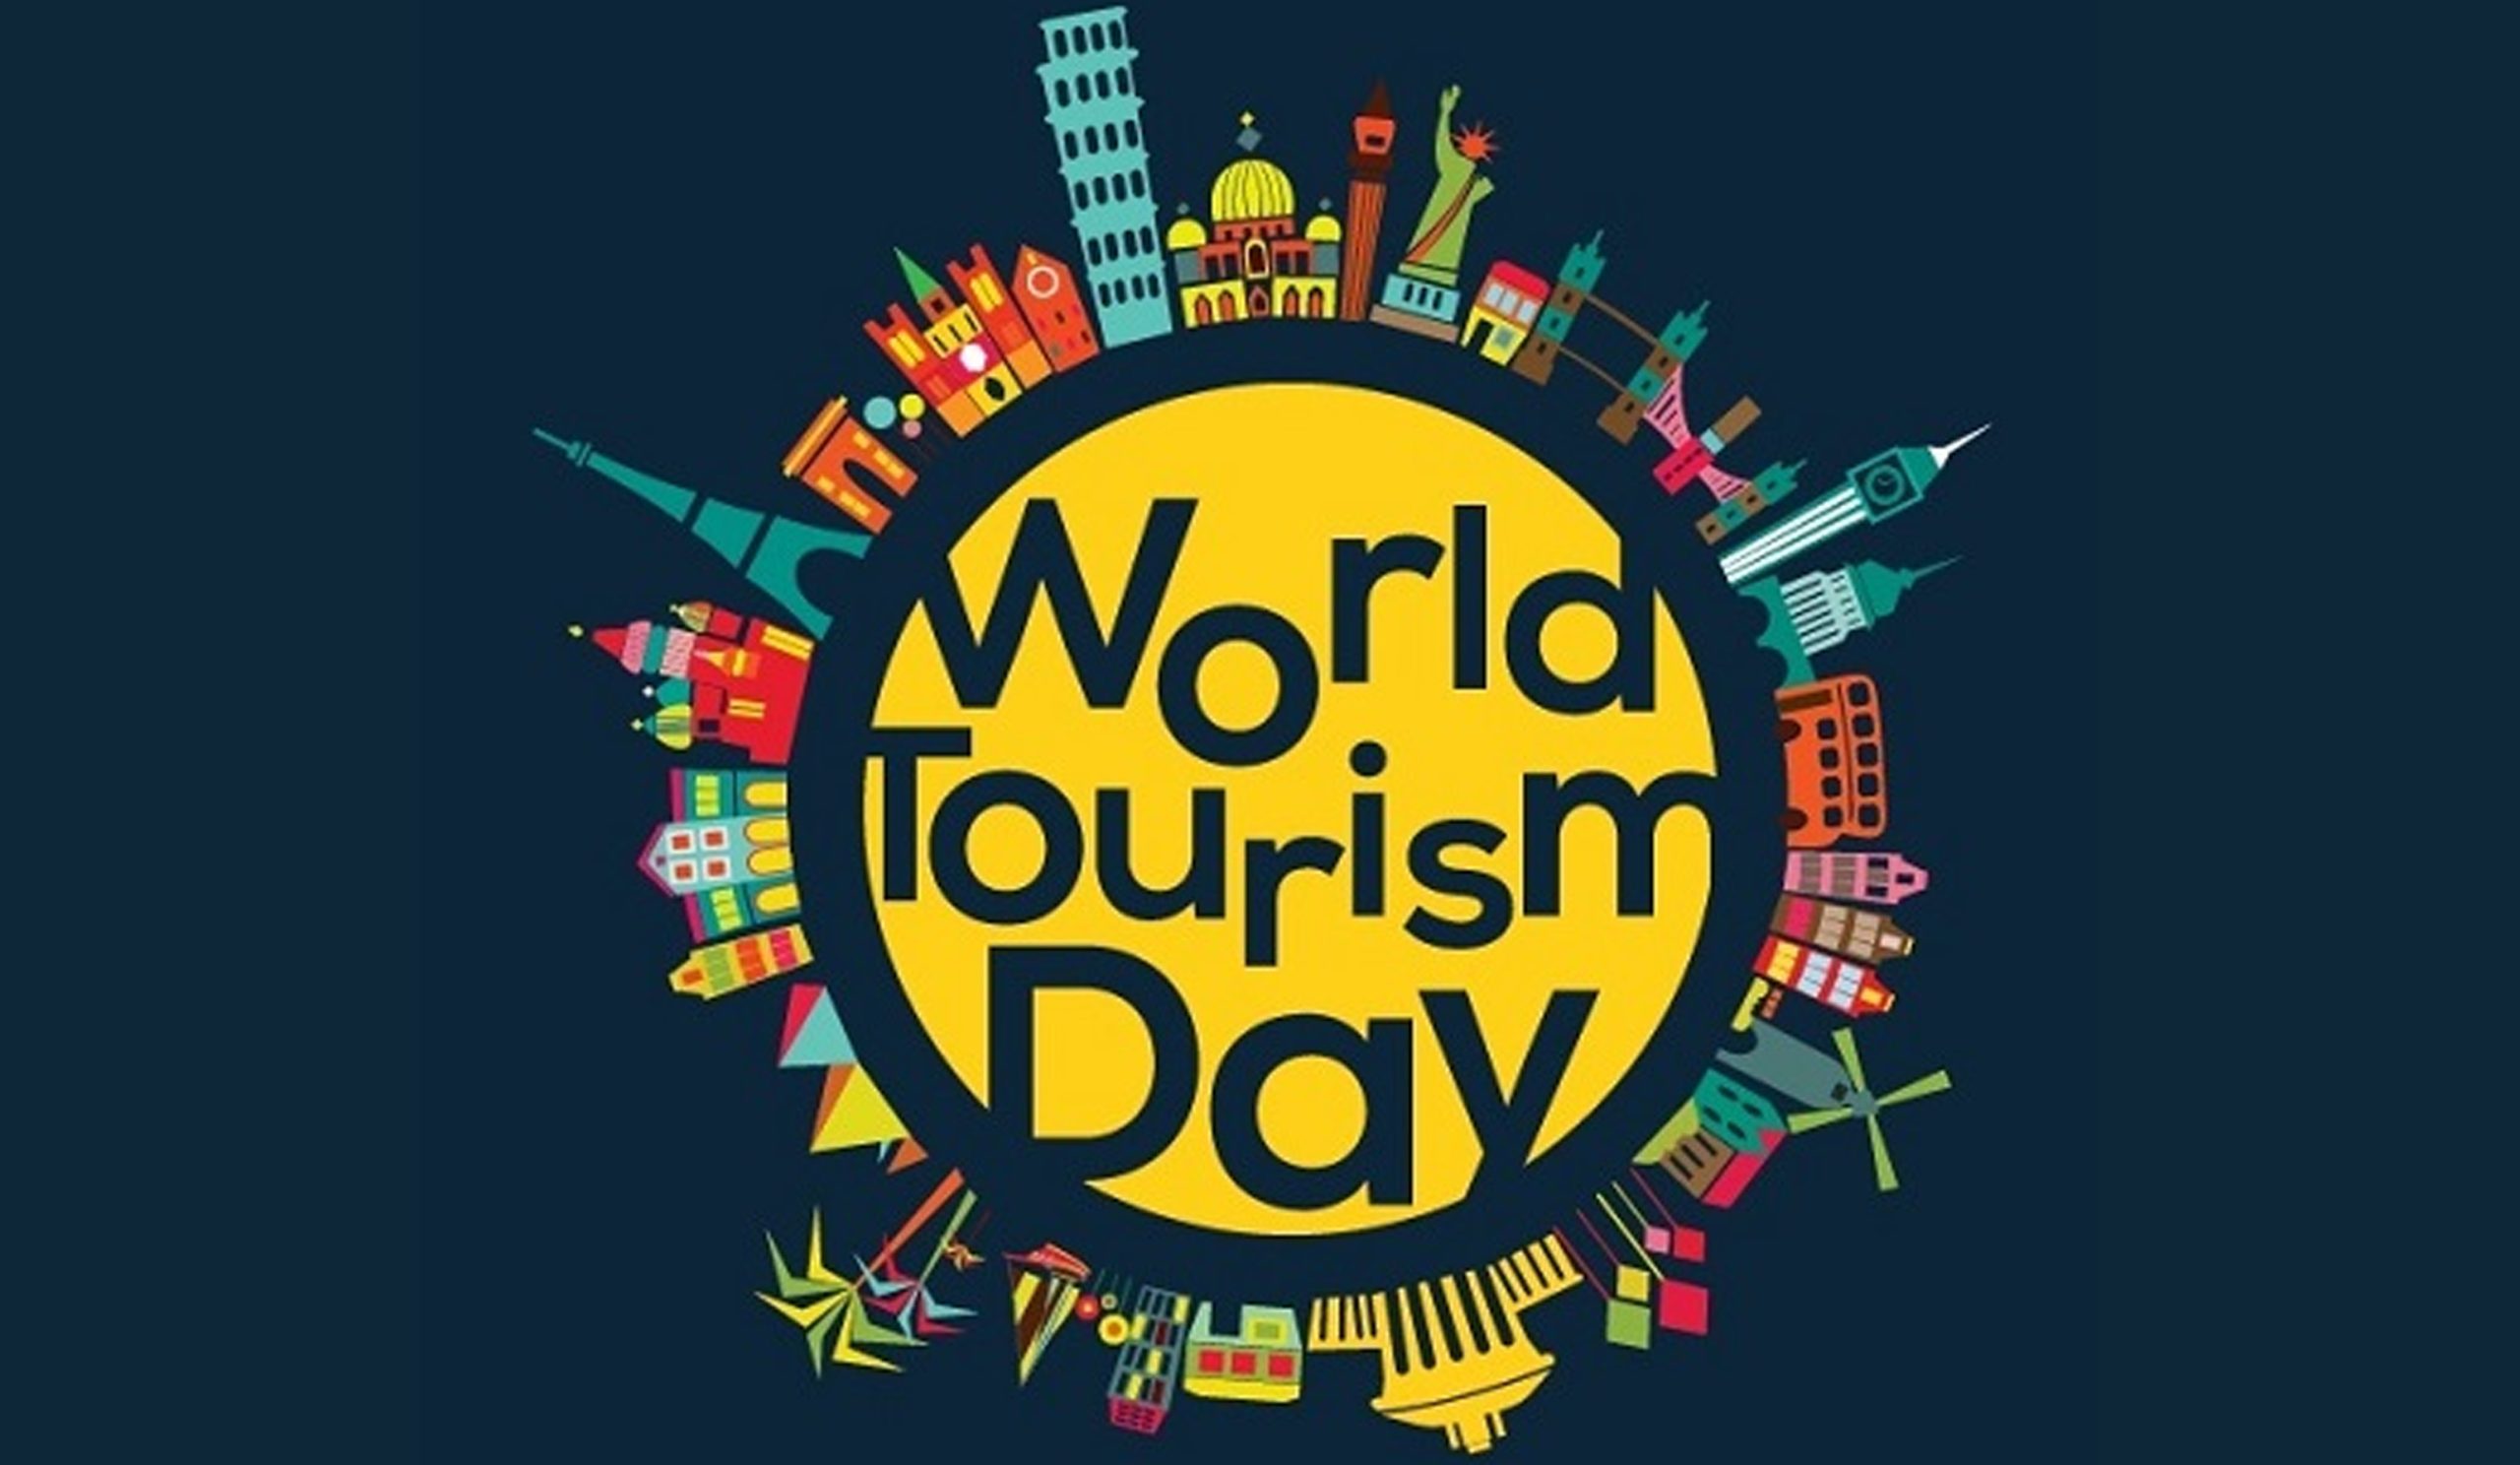 On 27th September celebration of World Tourism Day Amwal Al Ghad